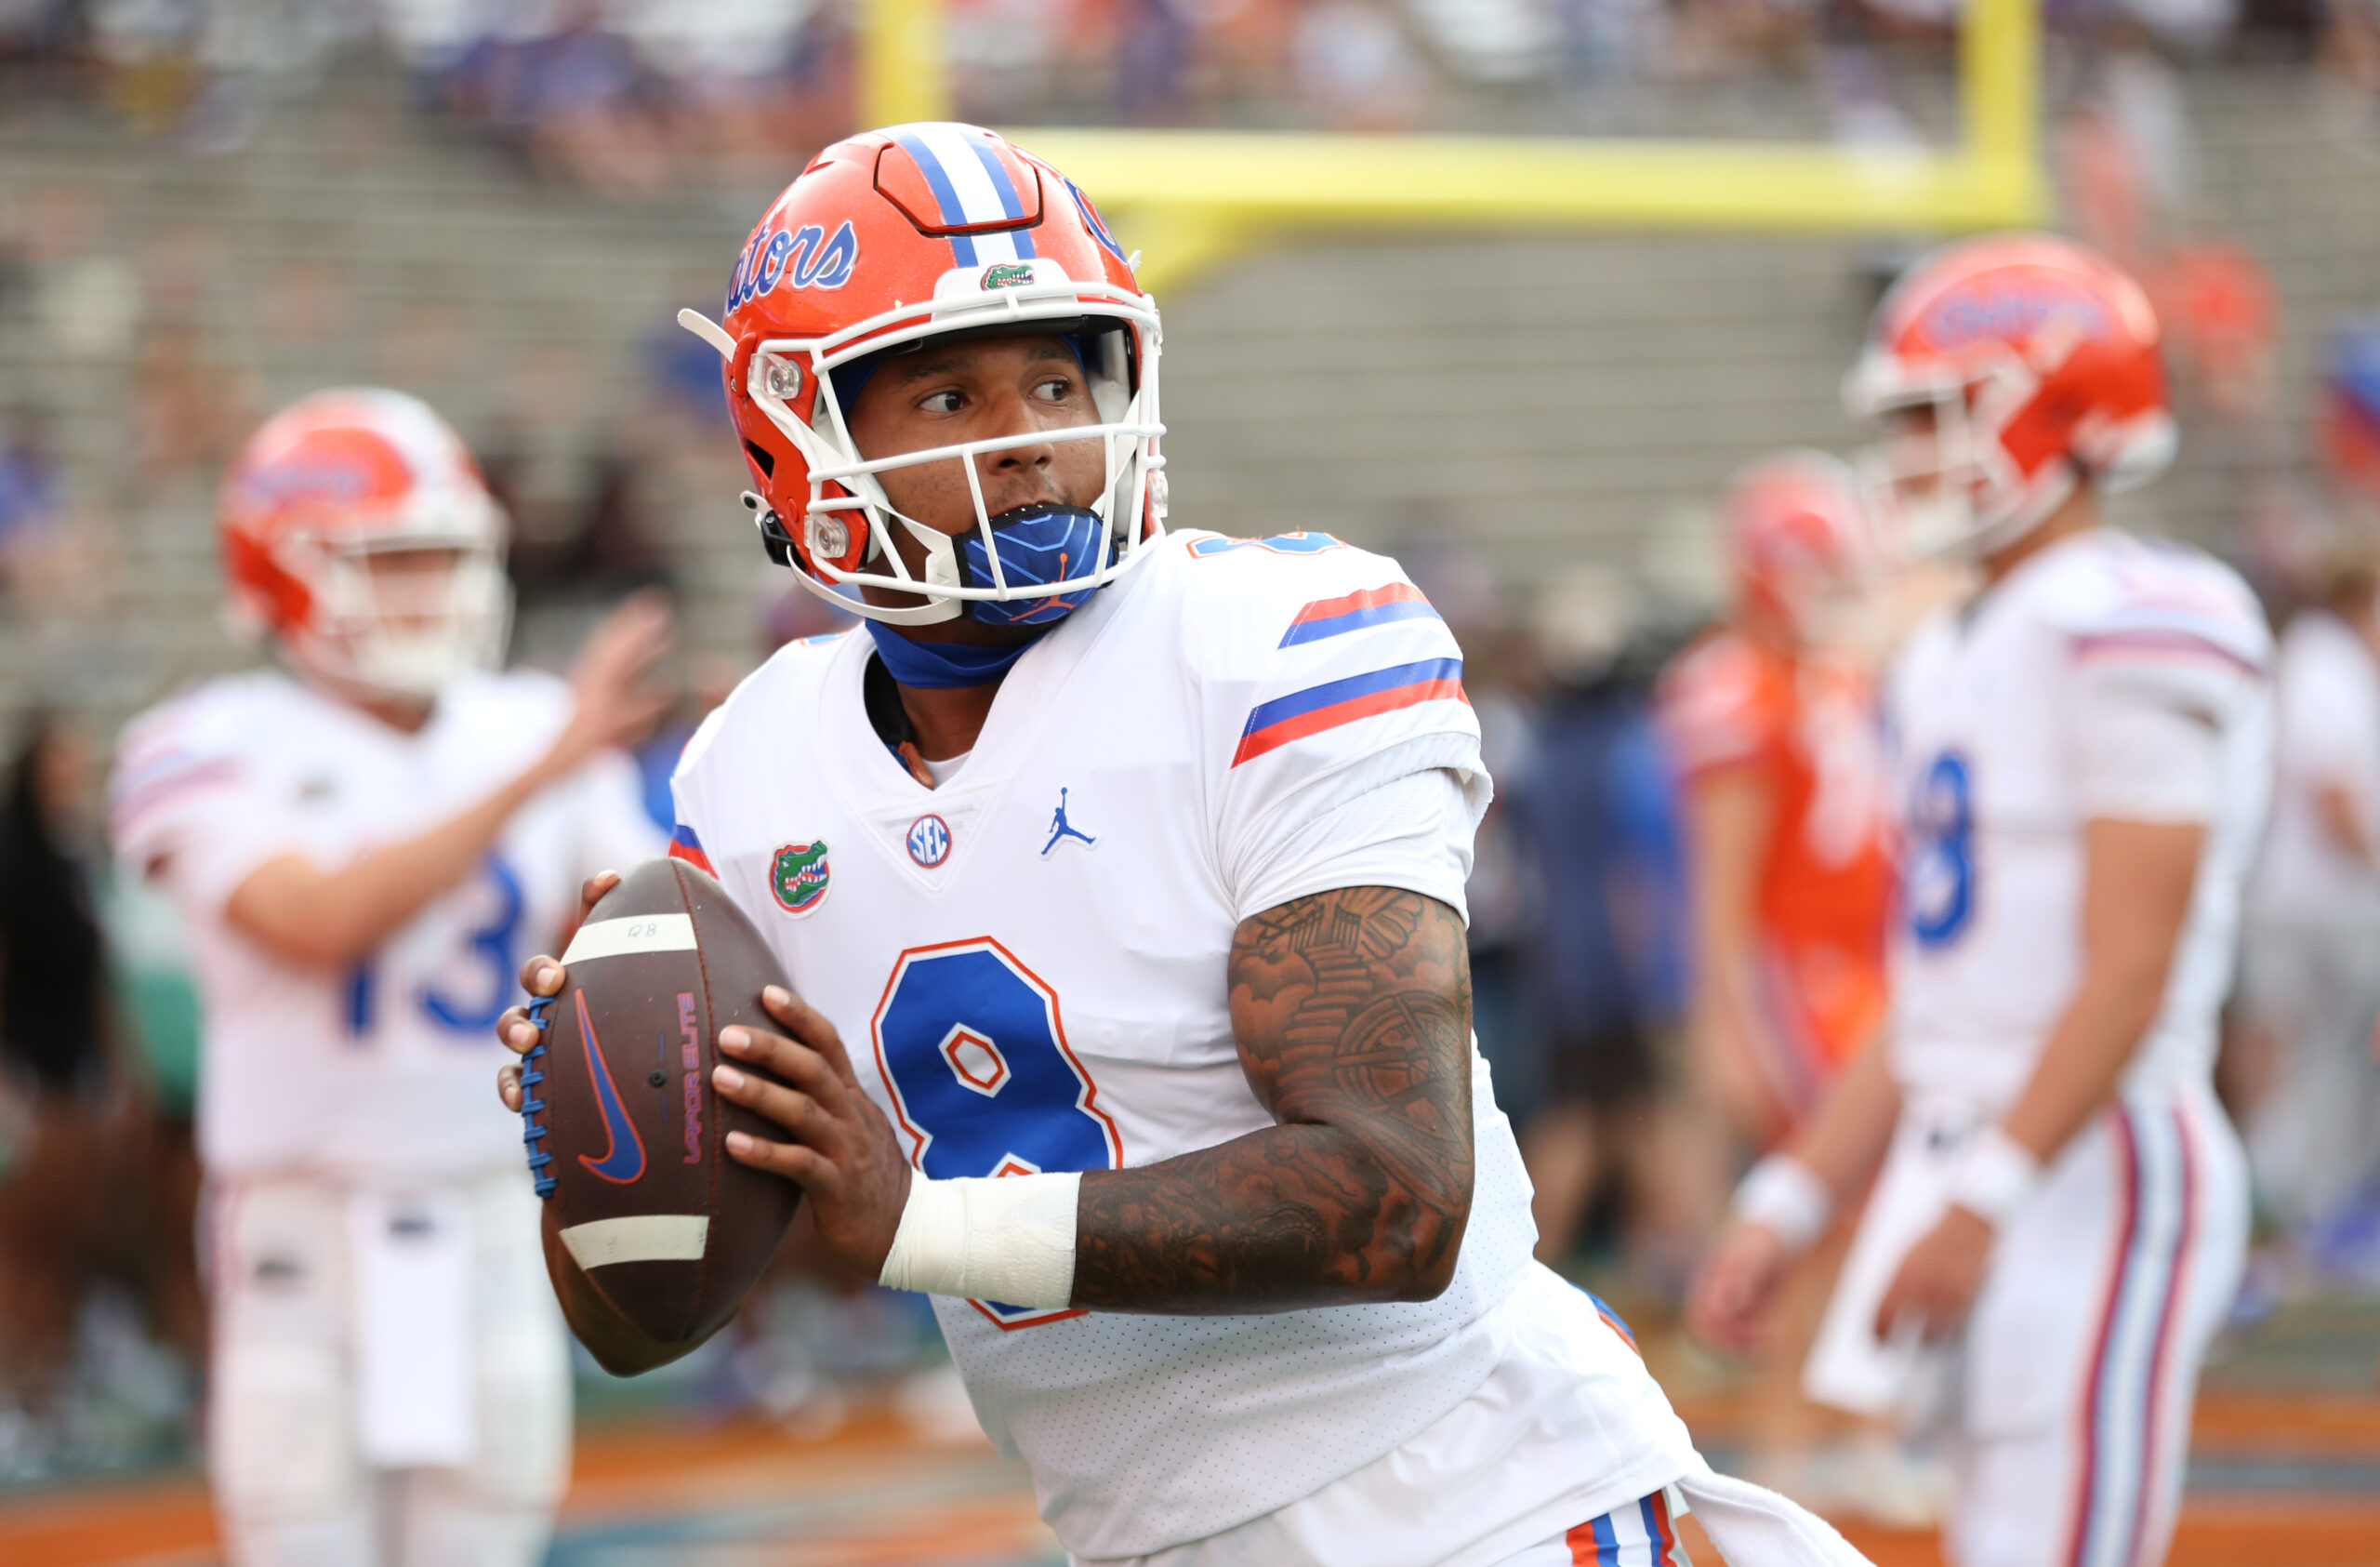 One of Florida’s former 4-star QBs just enter the transfer portal